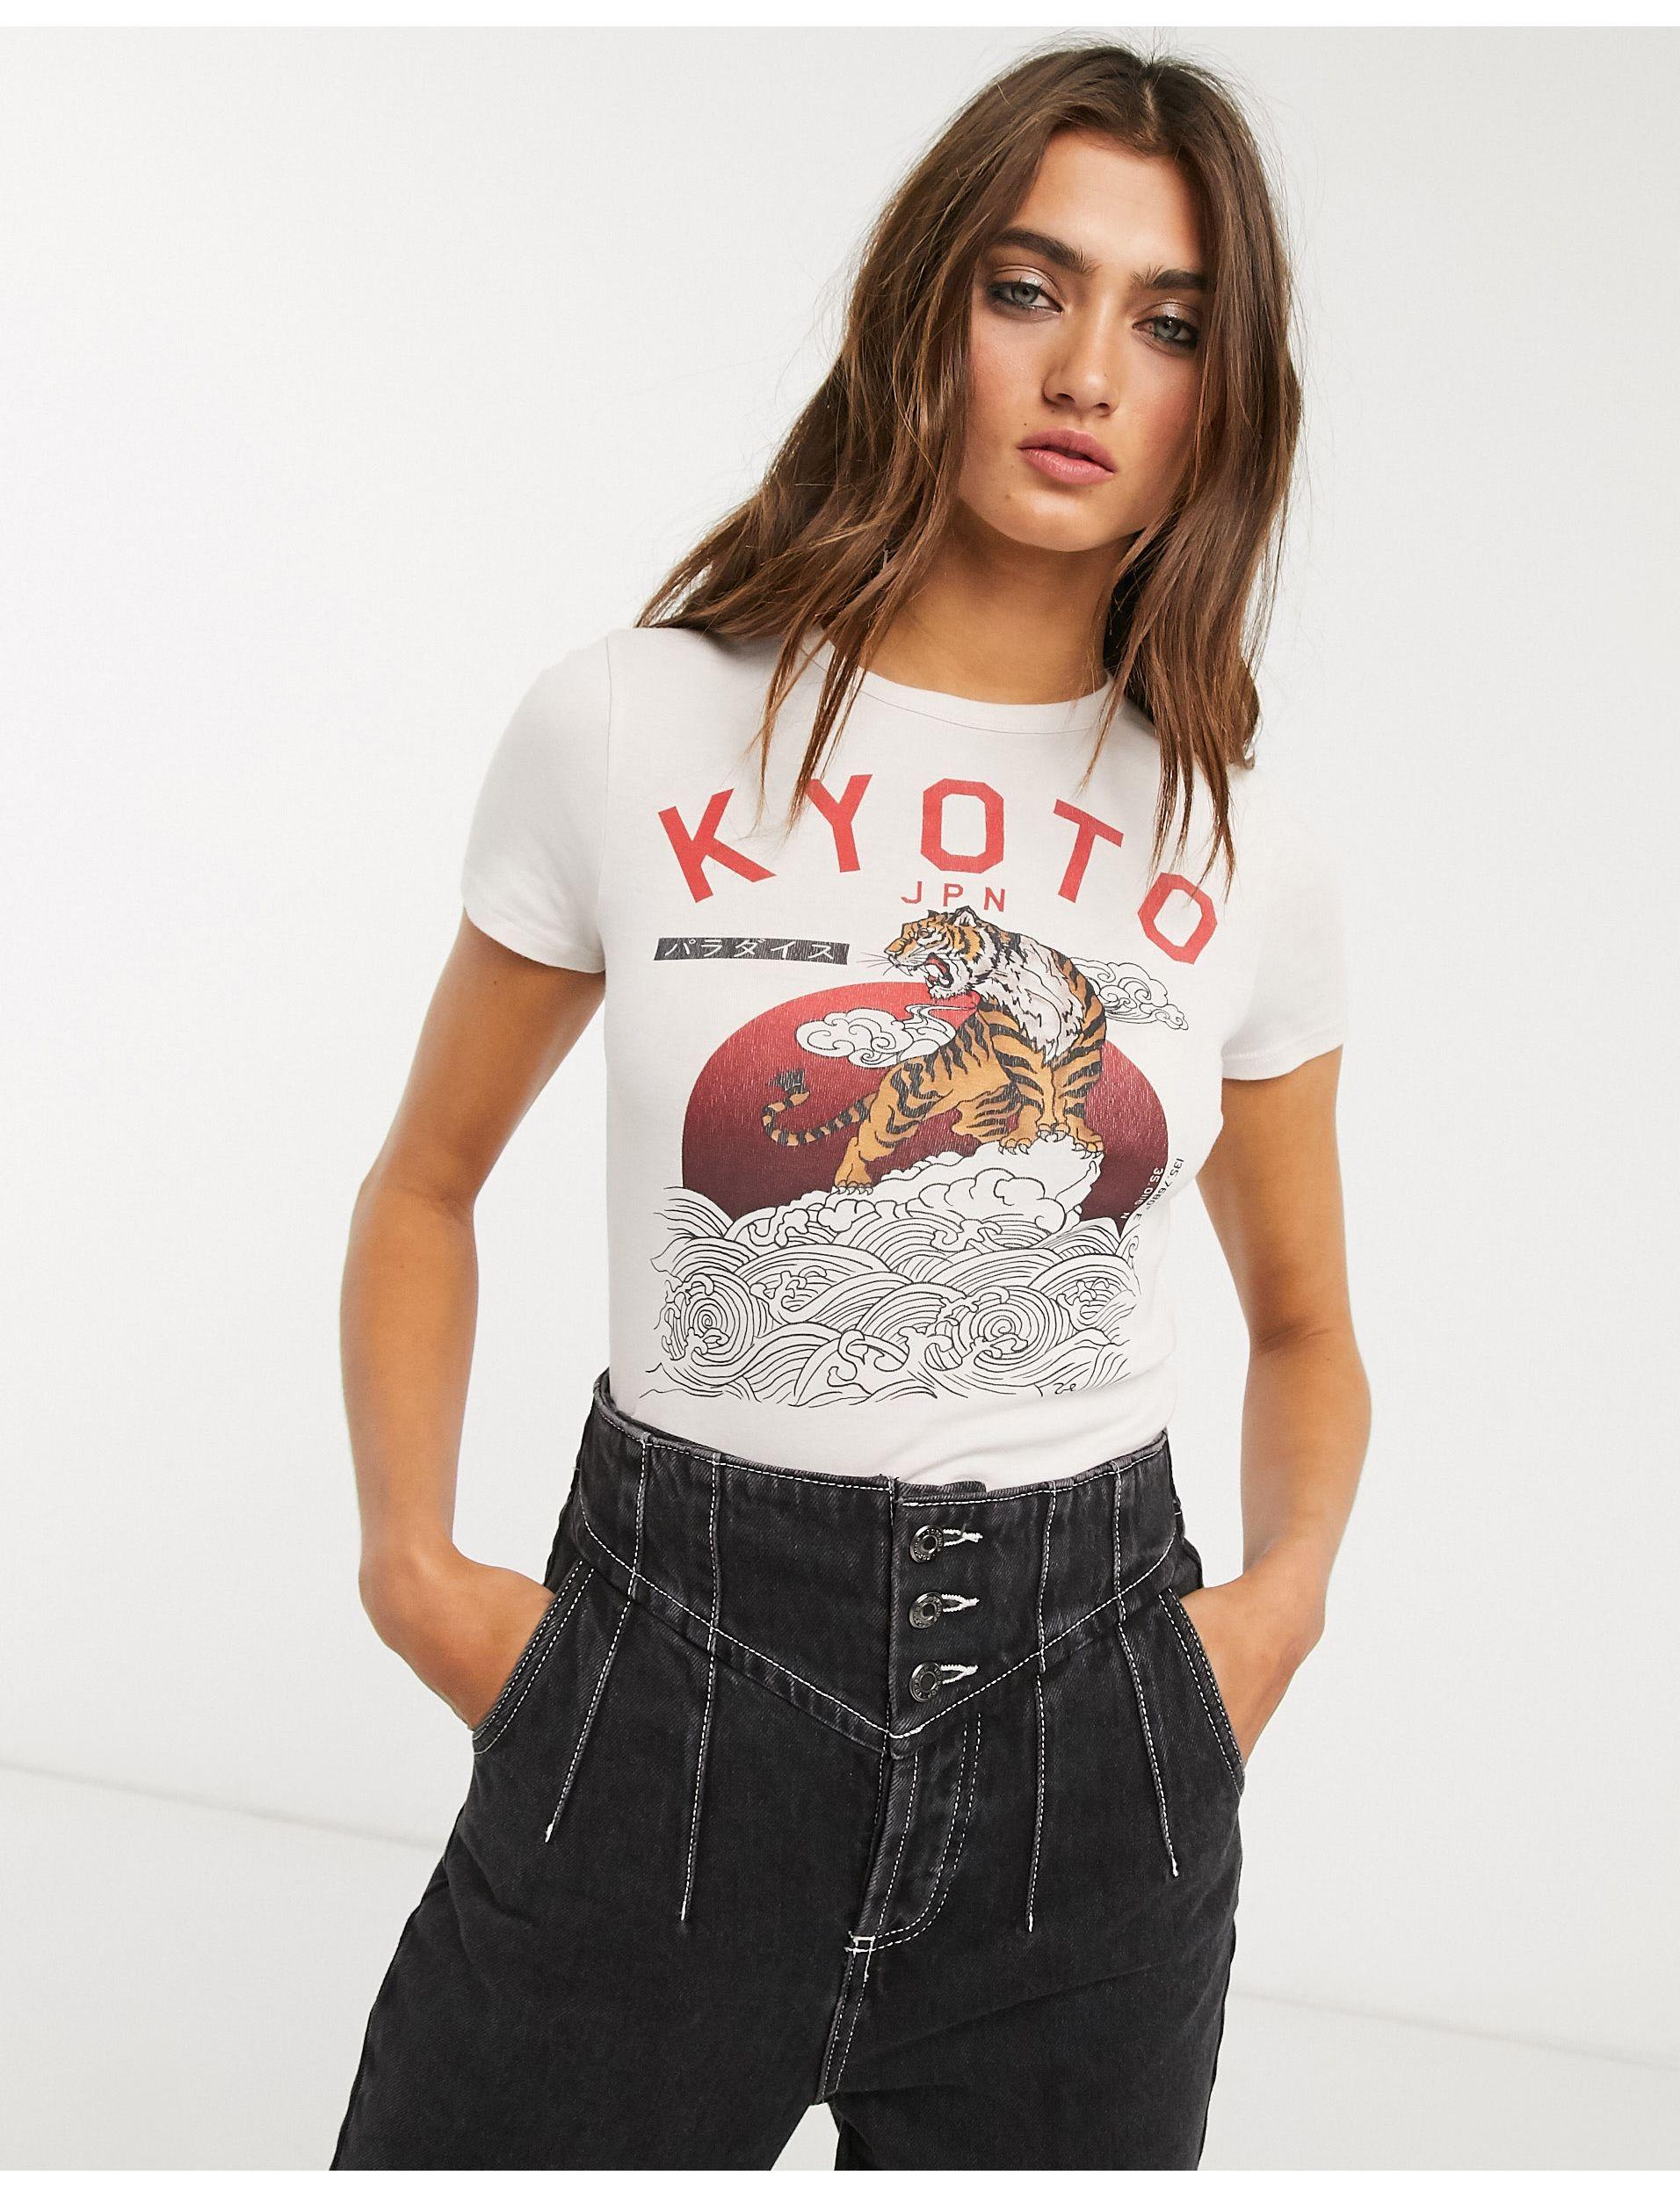 TOPSHOP Kyoto Graphic T-shirt | Lyst